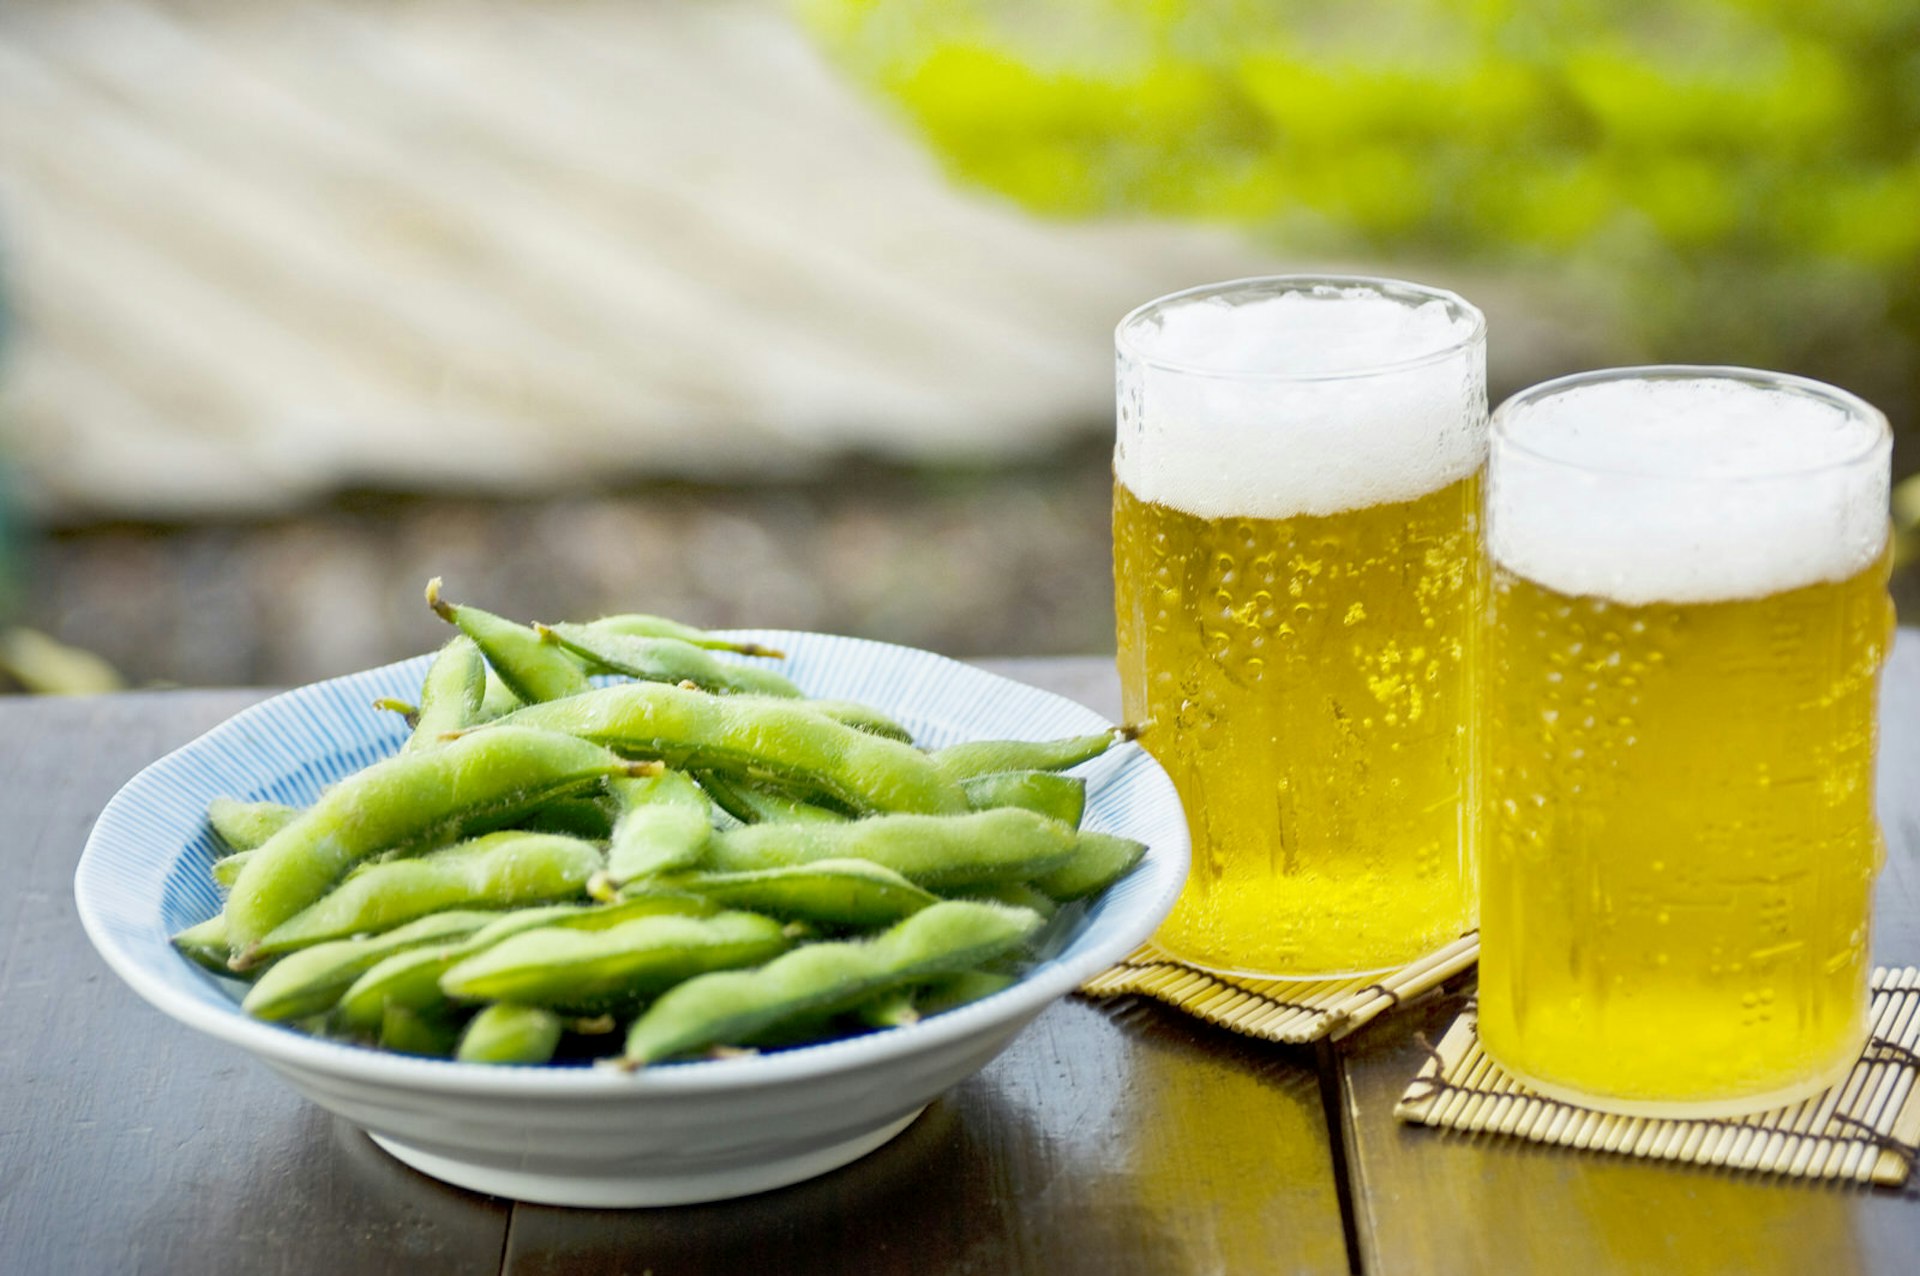 Tokyo summer - Two beers and a bowl of edamame beans are pictured on a table in the sunshine 